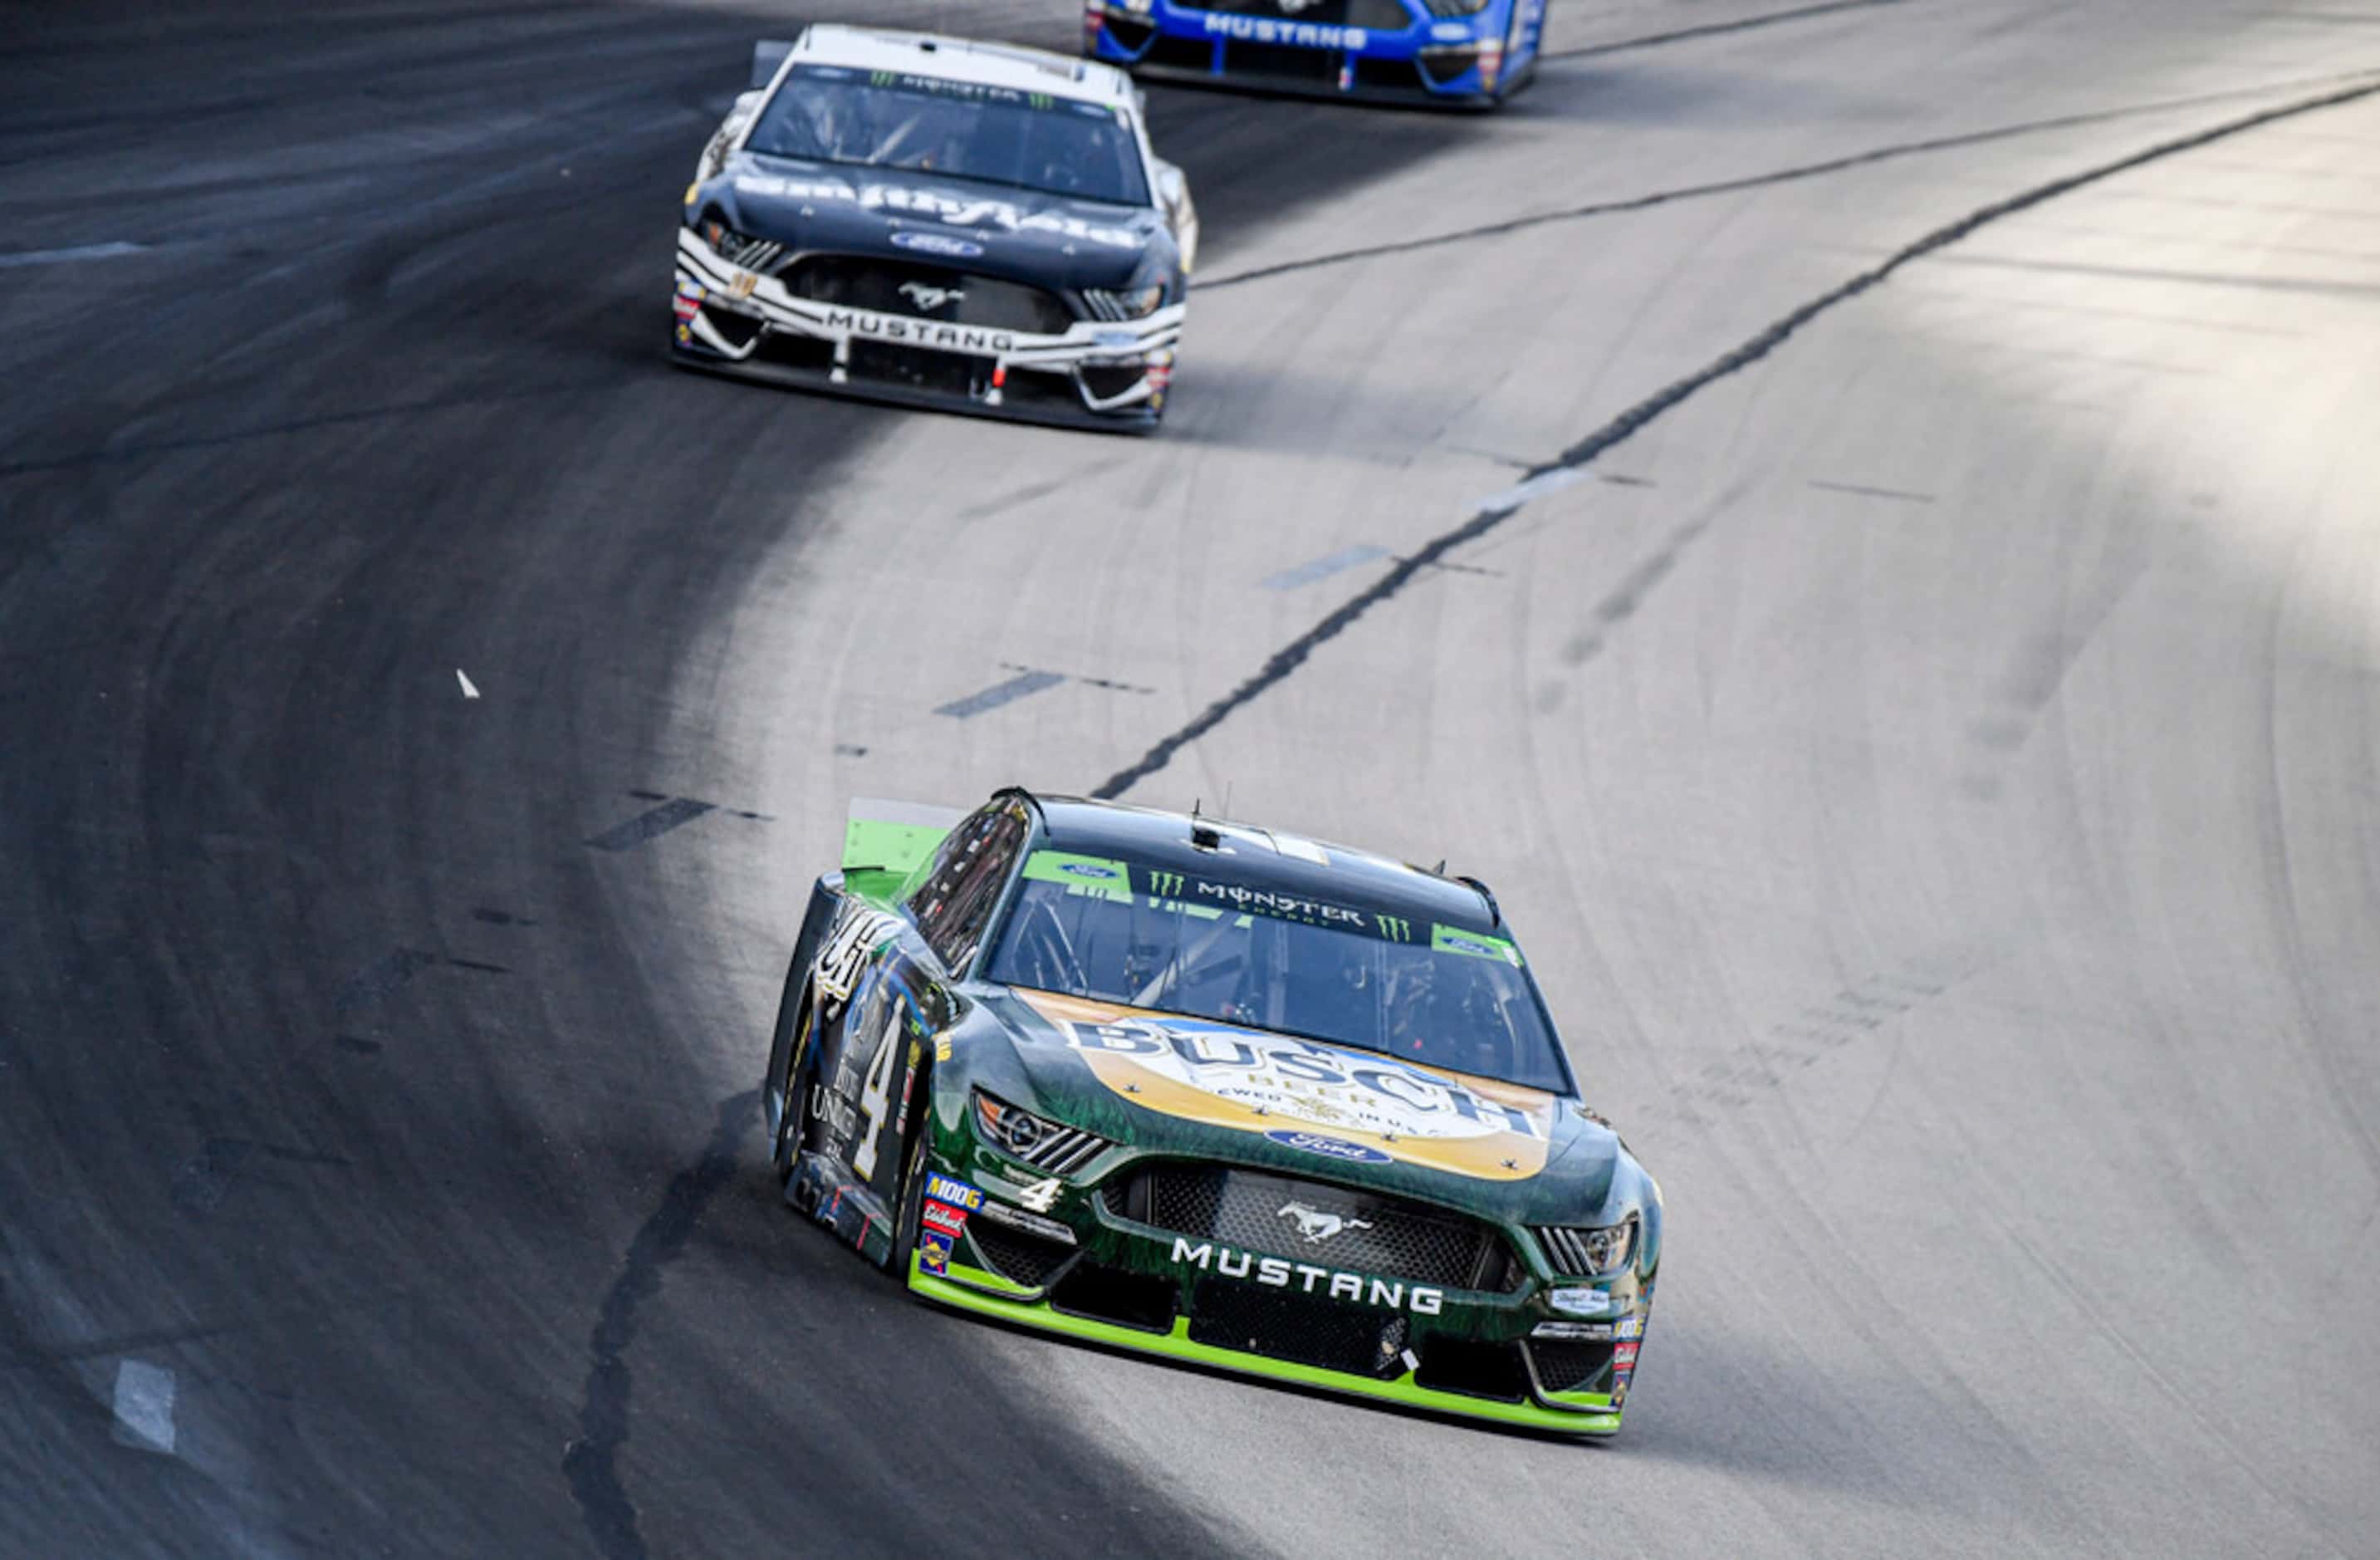 Clint Bowyer (14) and Kevin Harvick (4) battle for position during a NASCAR auto race at...